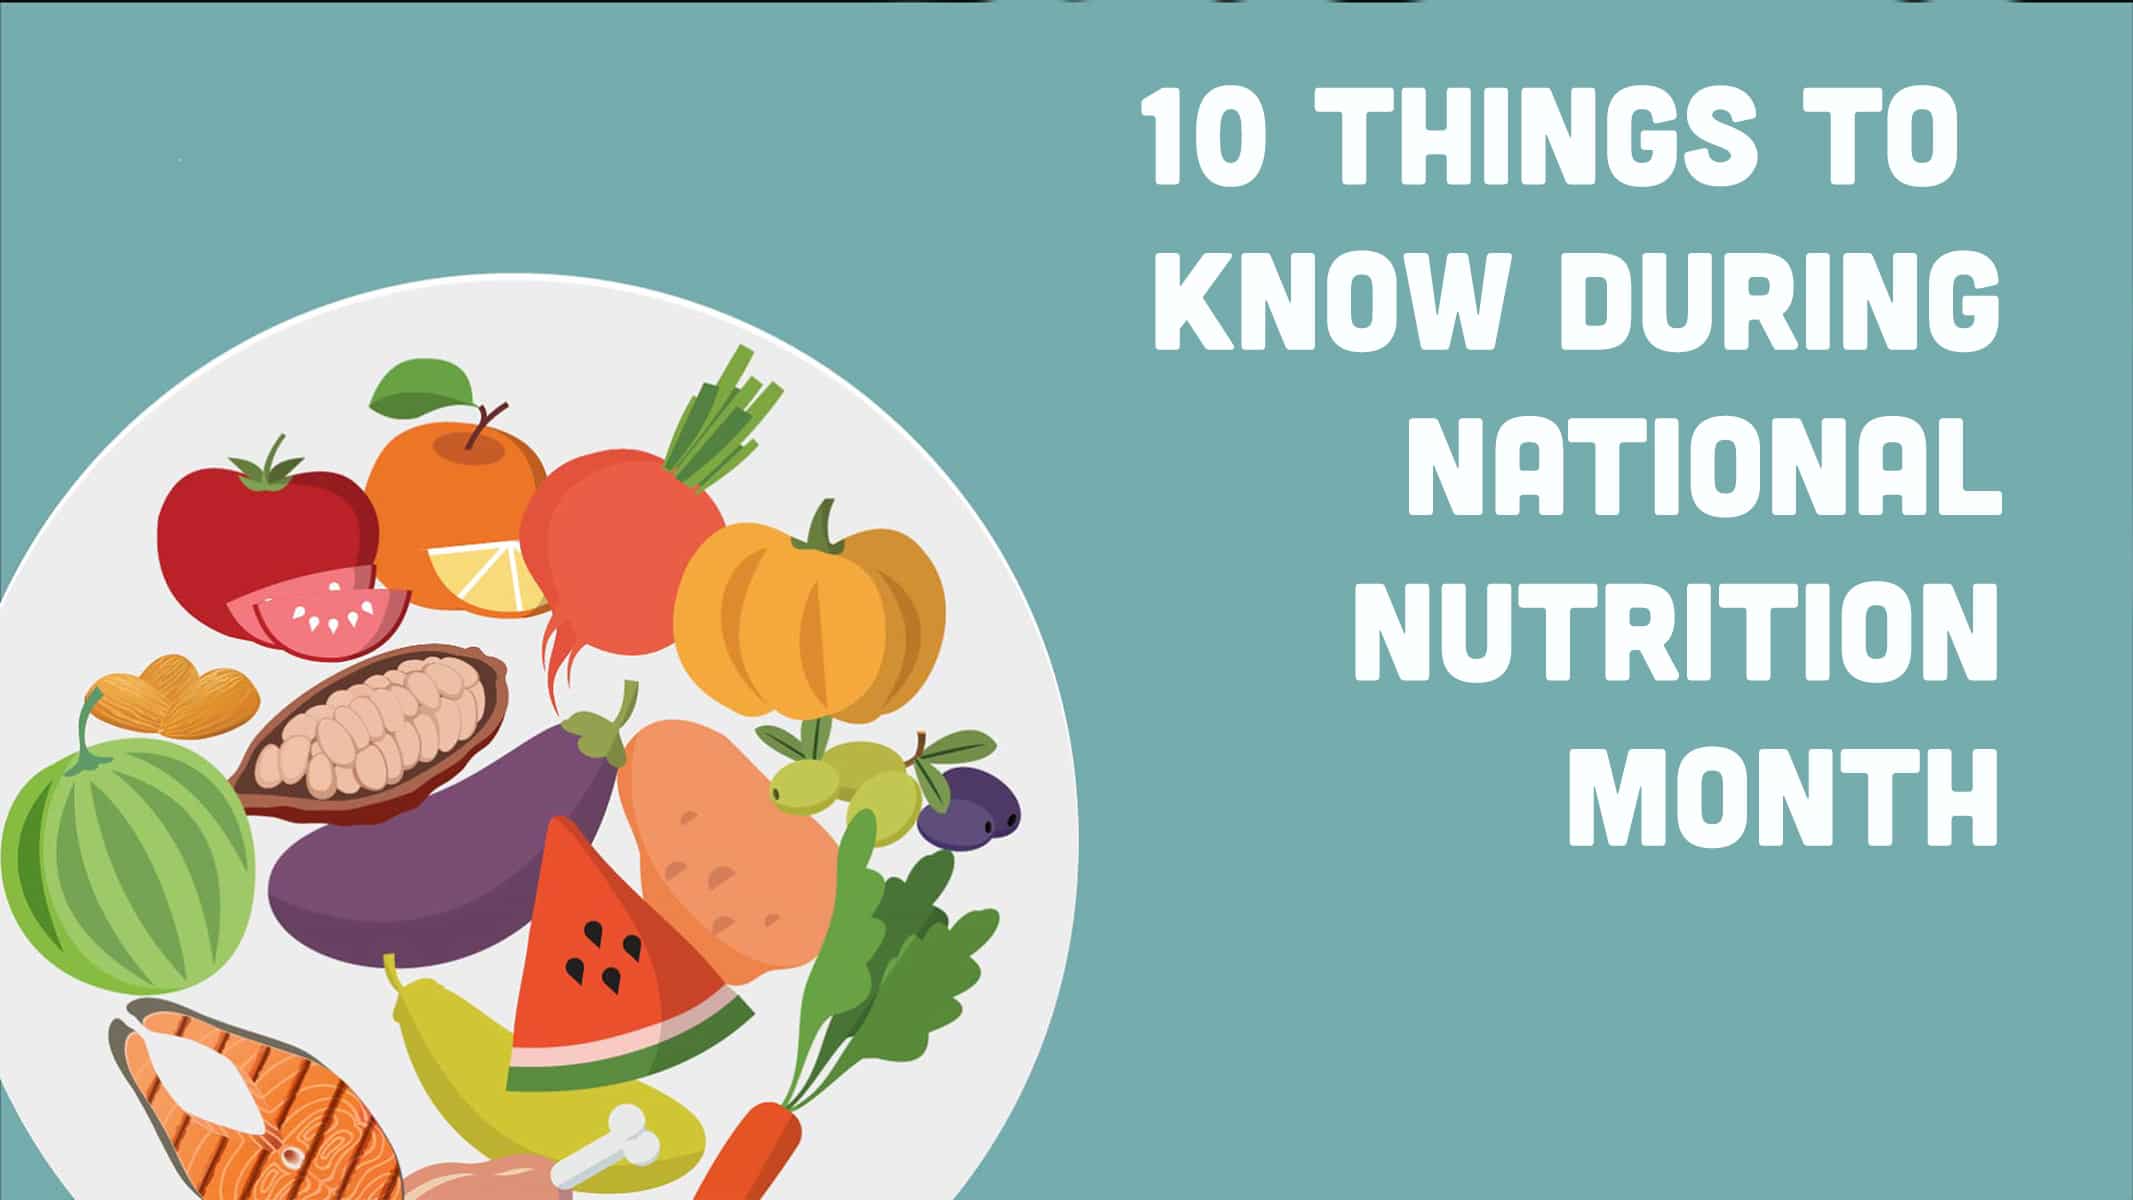 Plate of fruits and vegetables with text "10 Things to Know During National Nutrition Month."